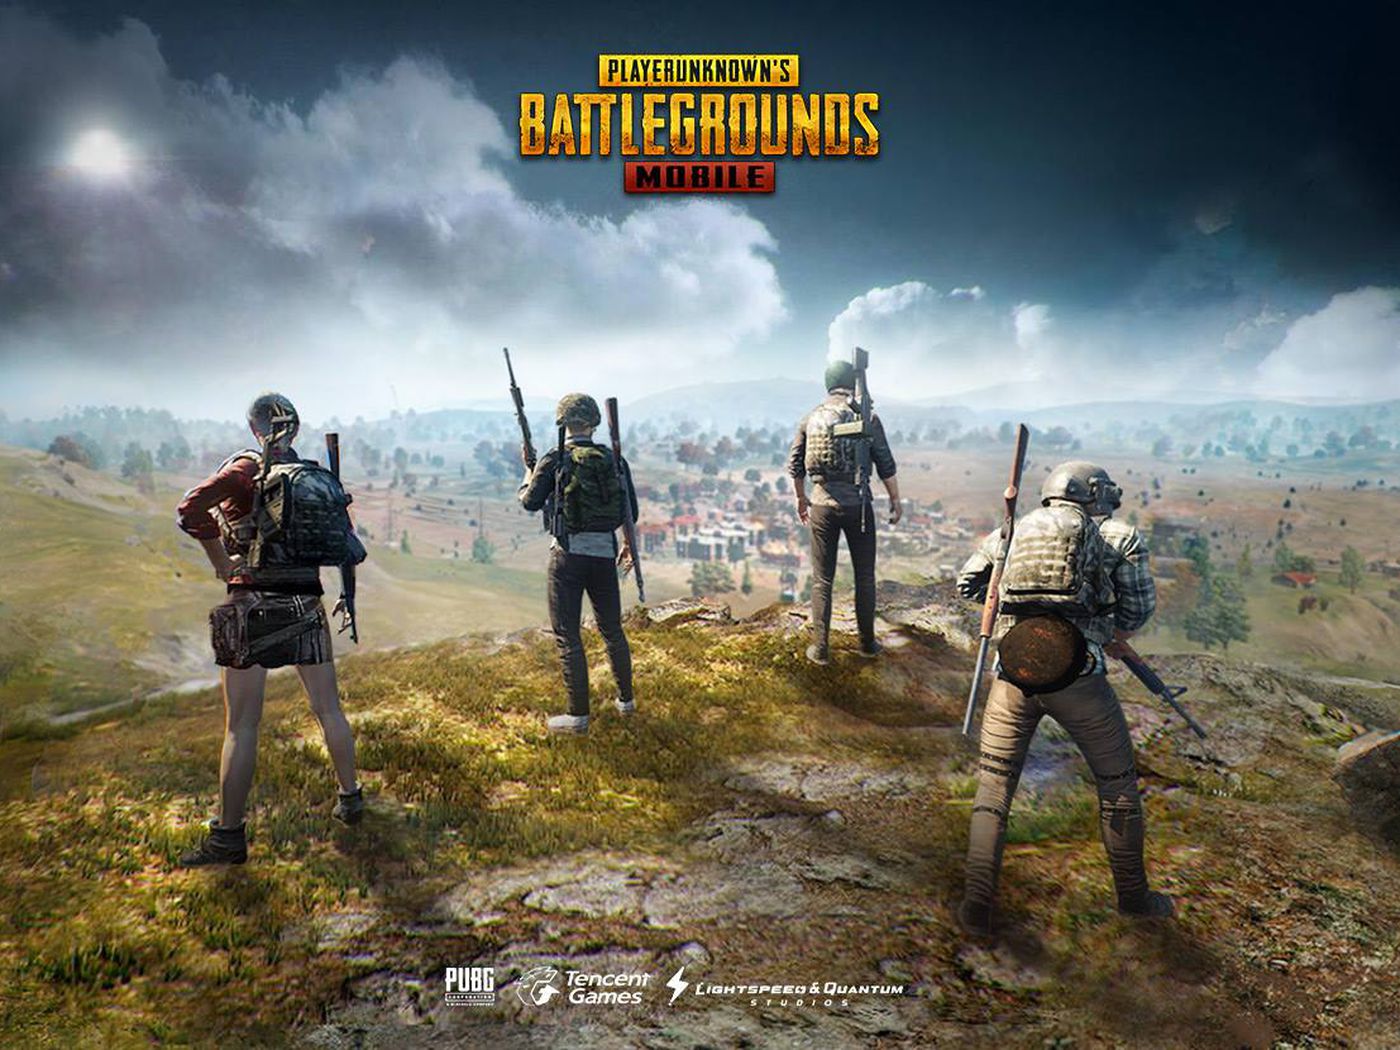 PUBG Mobile is now reportedly the worlds highest grossing mobile